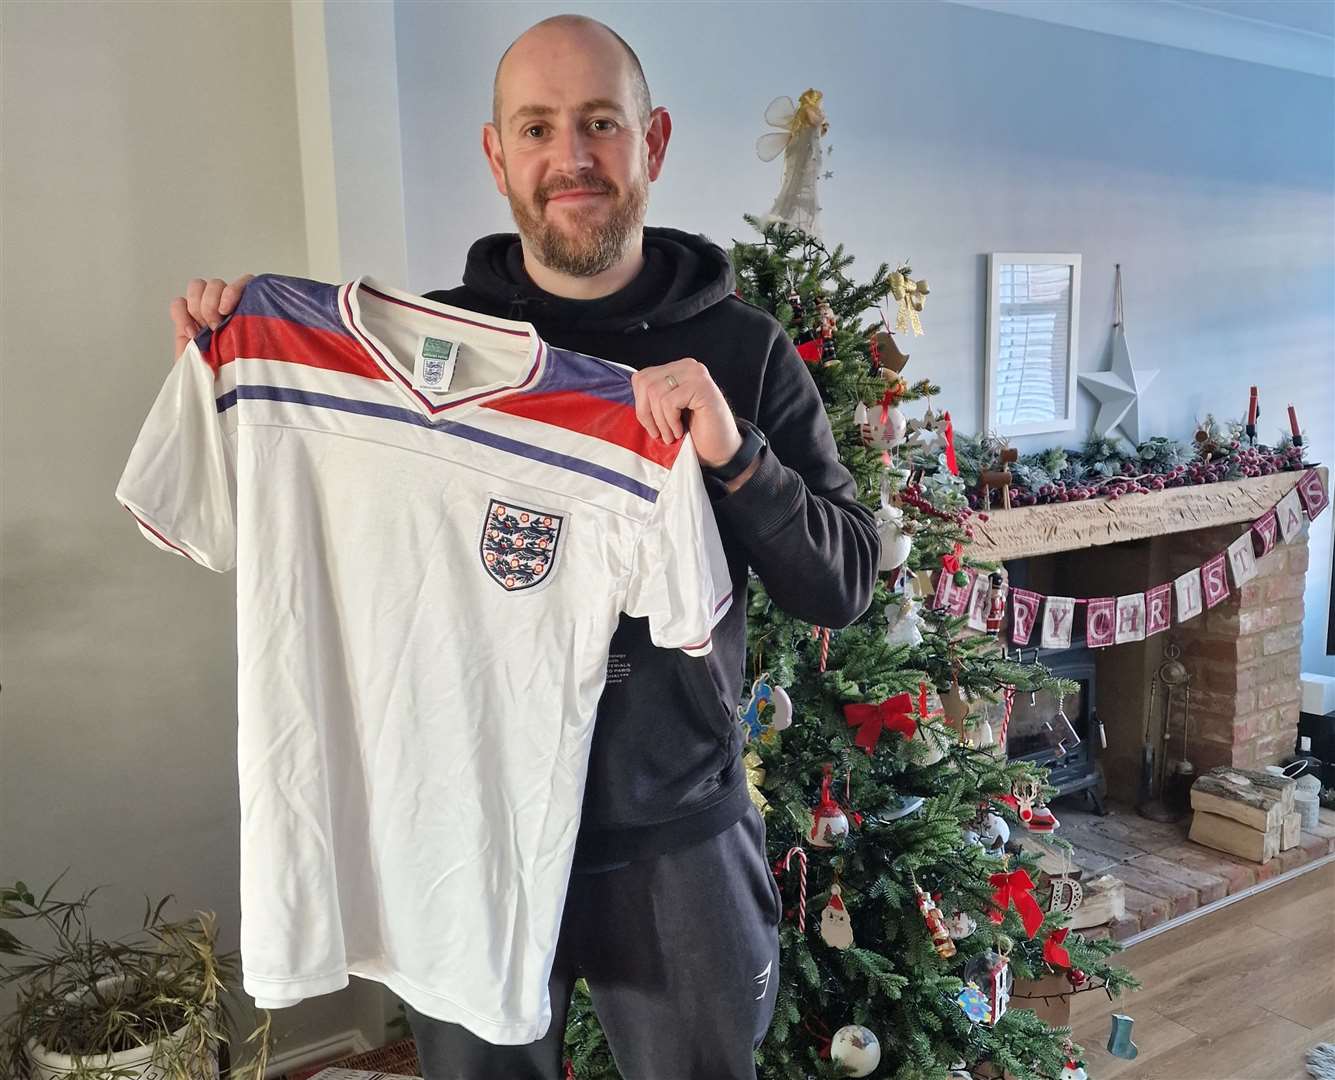 Phil Greene, from Herne Bay, bought the football shirt last Thursday. Picture: Phil Greene